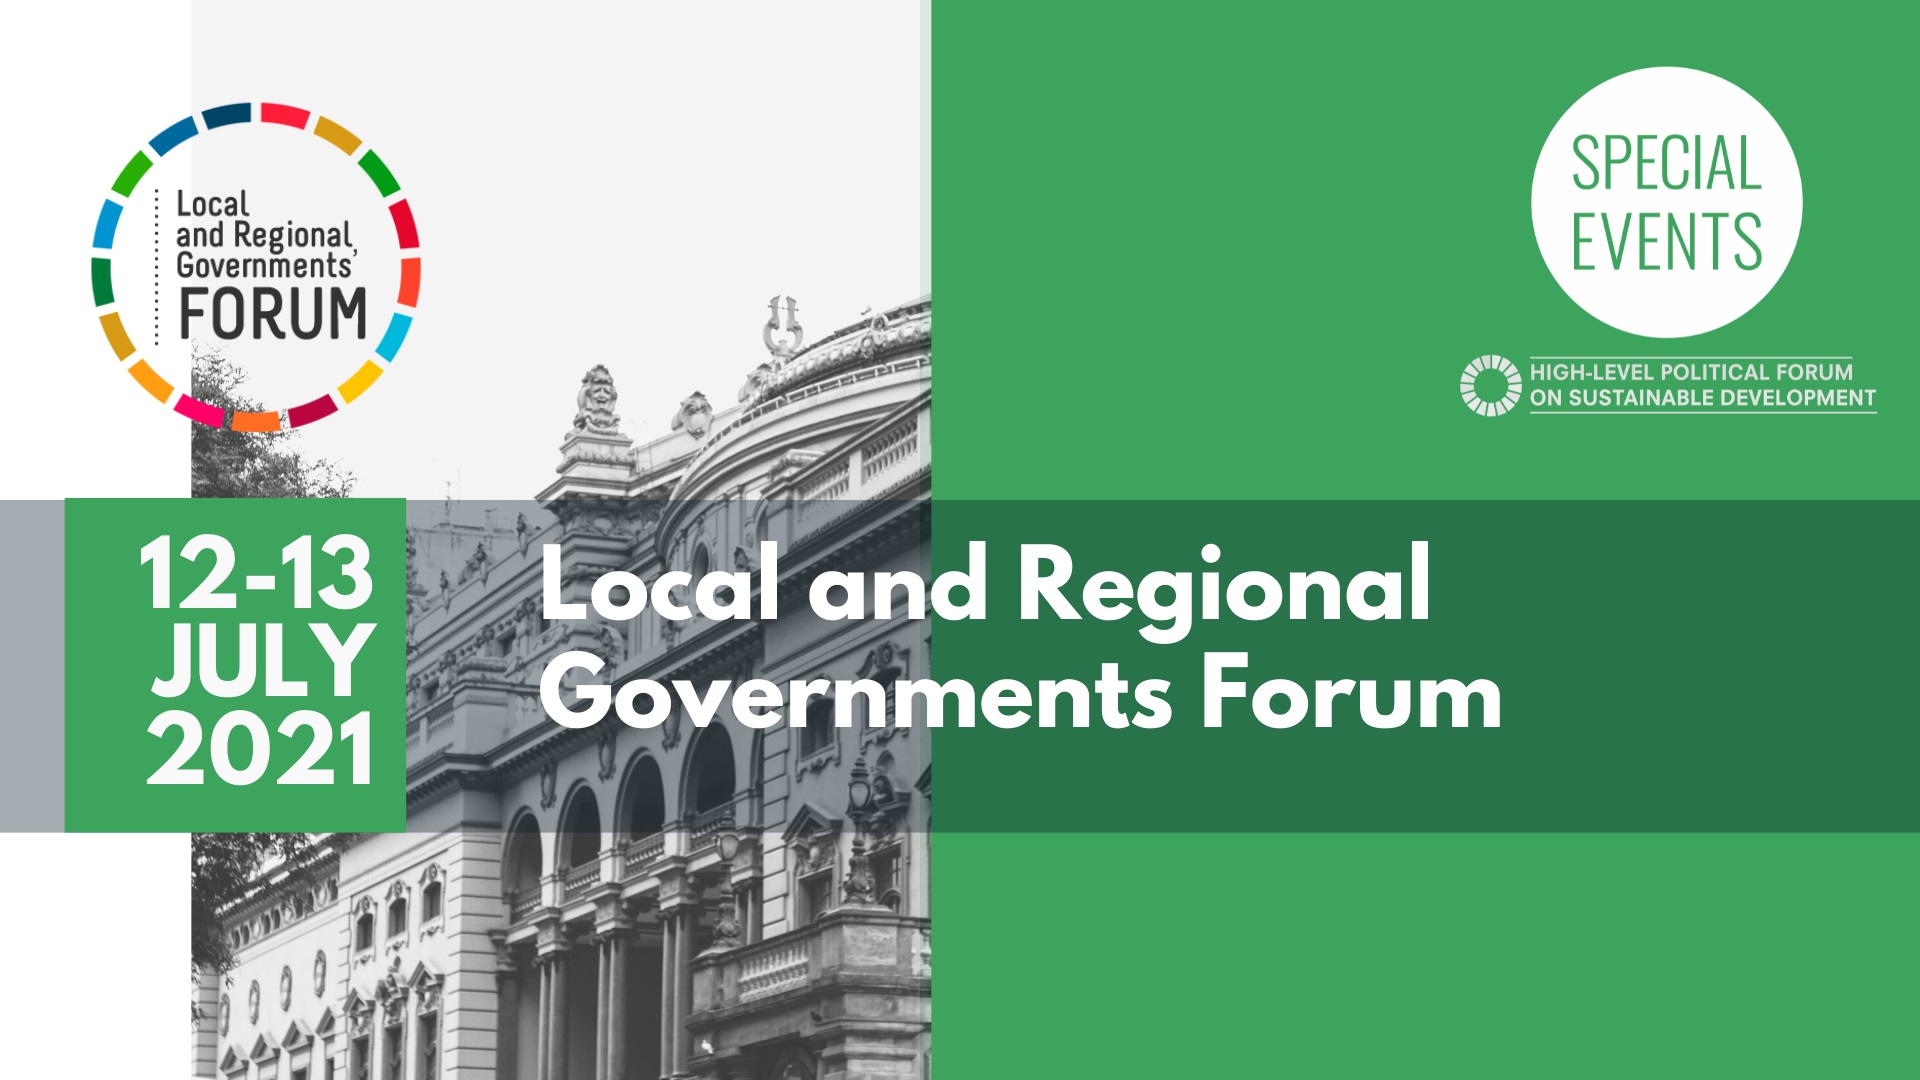 Local and Regional Governments Forum